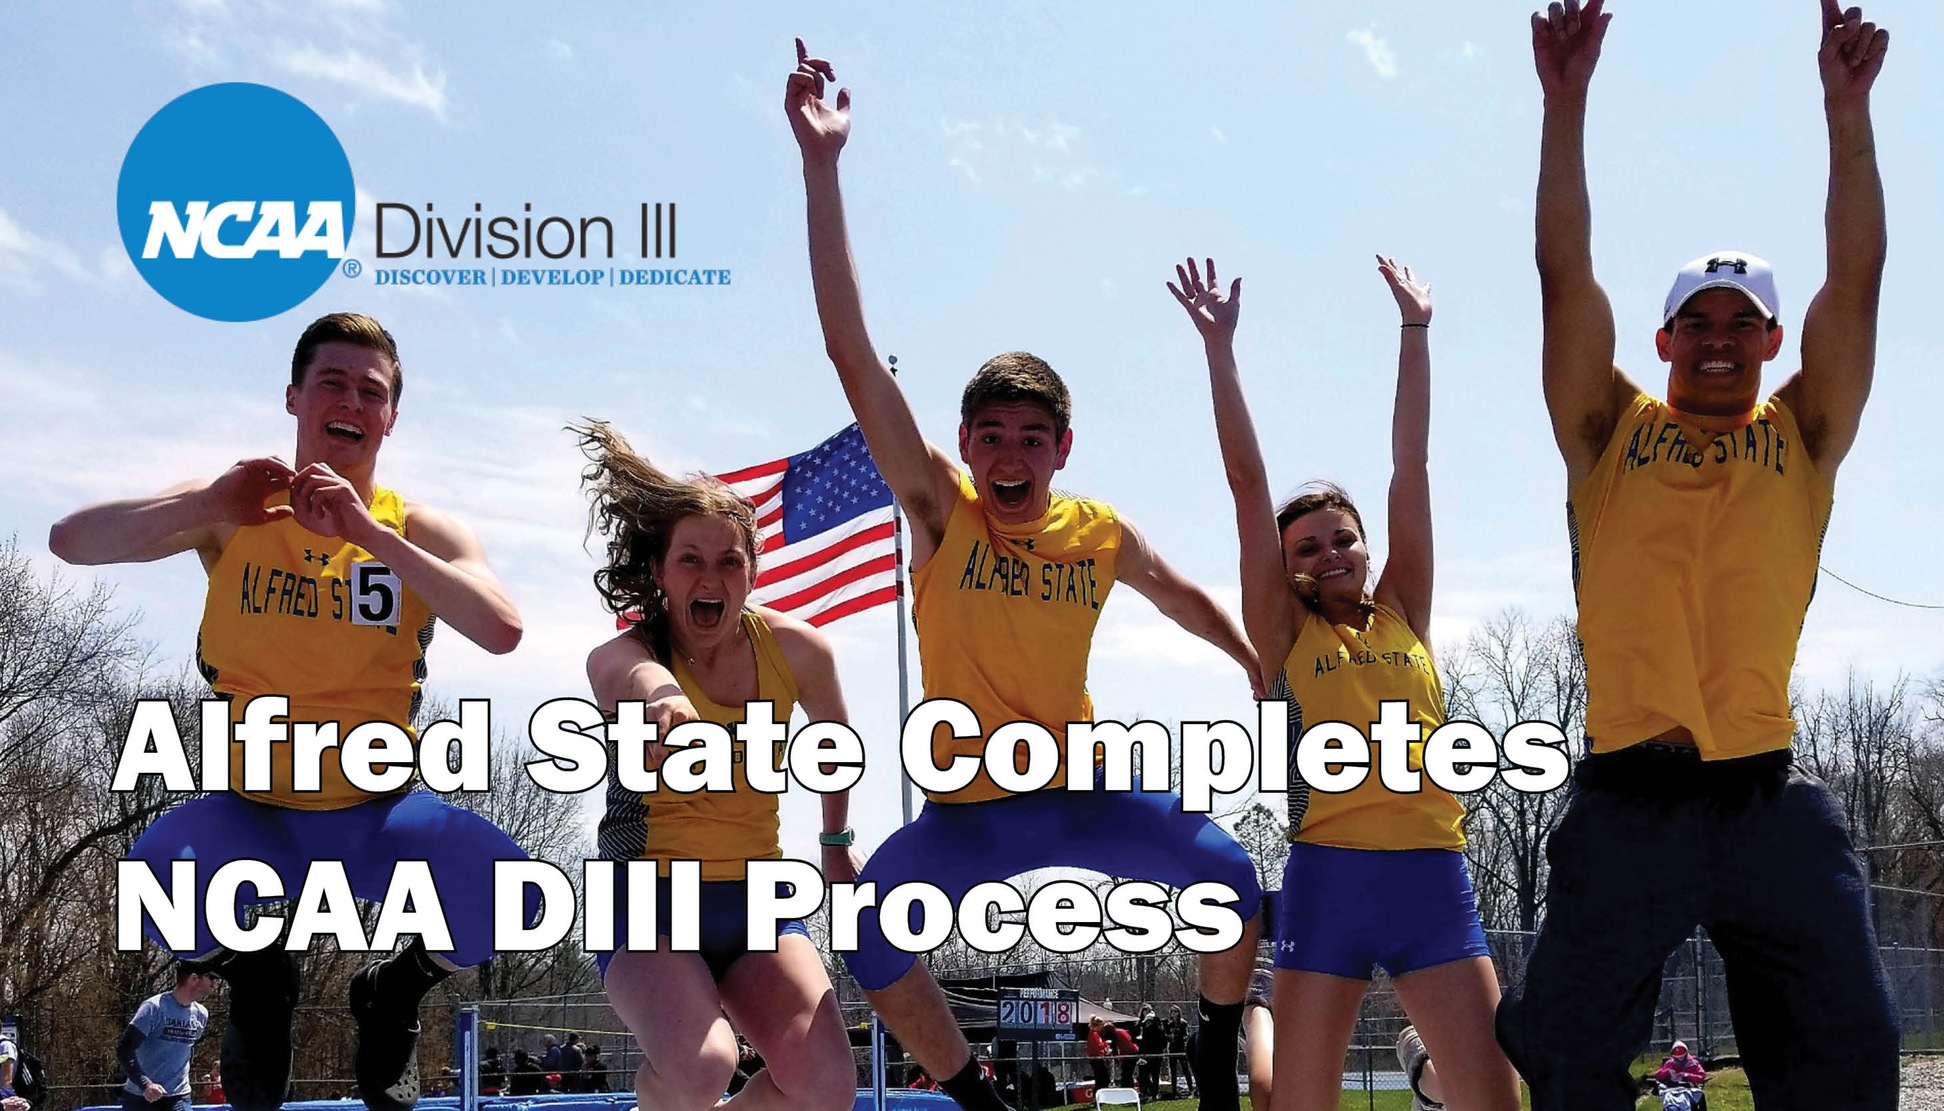 Alfred State completes NCAA DIII Process